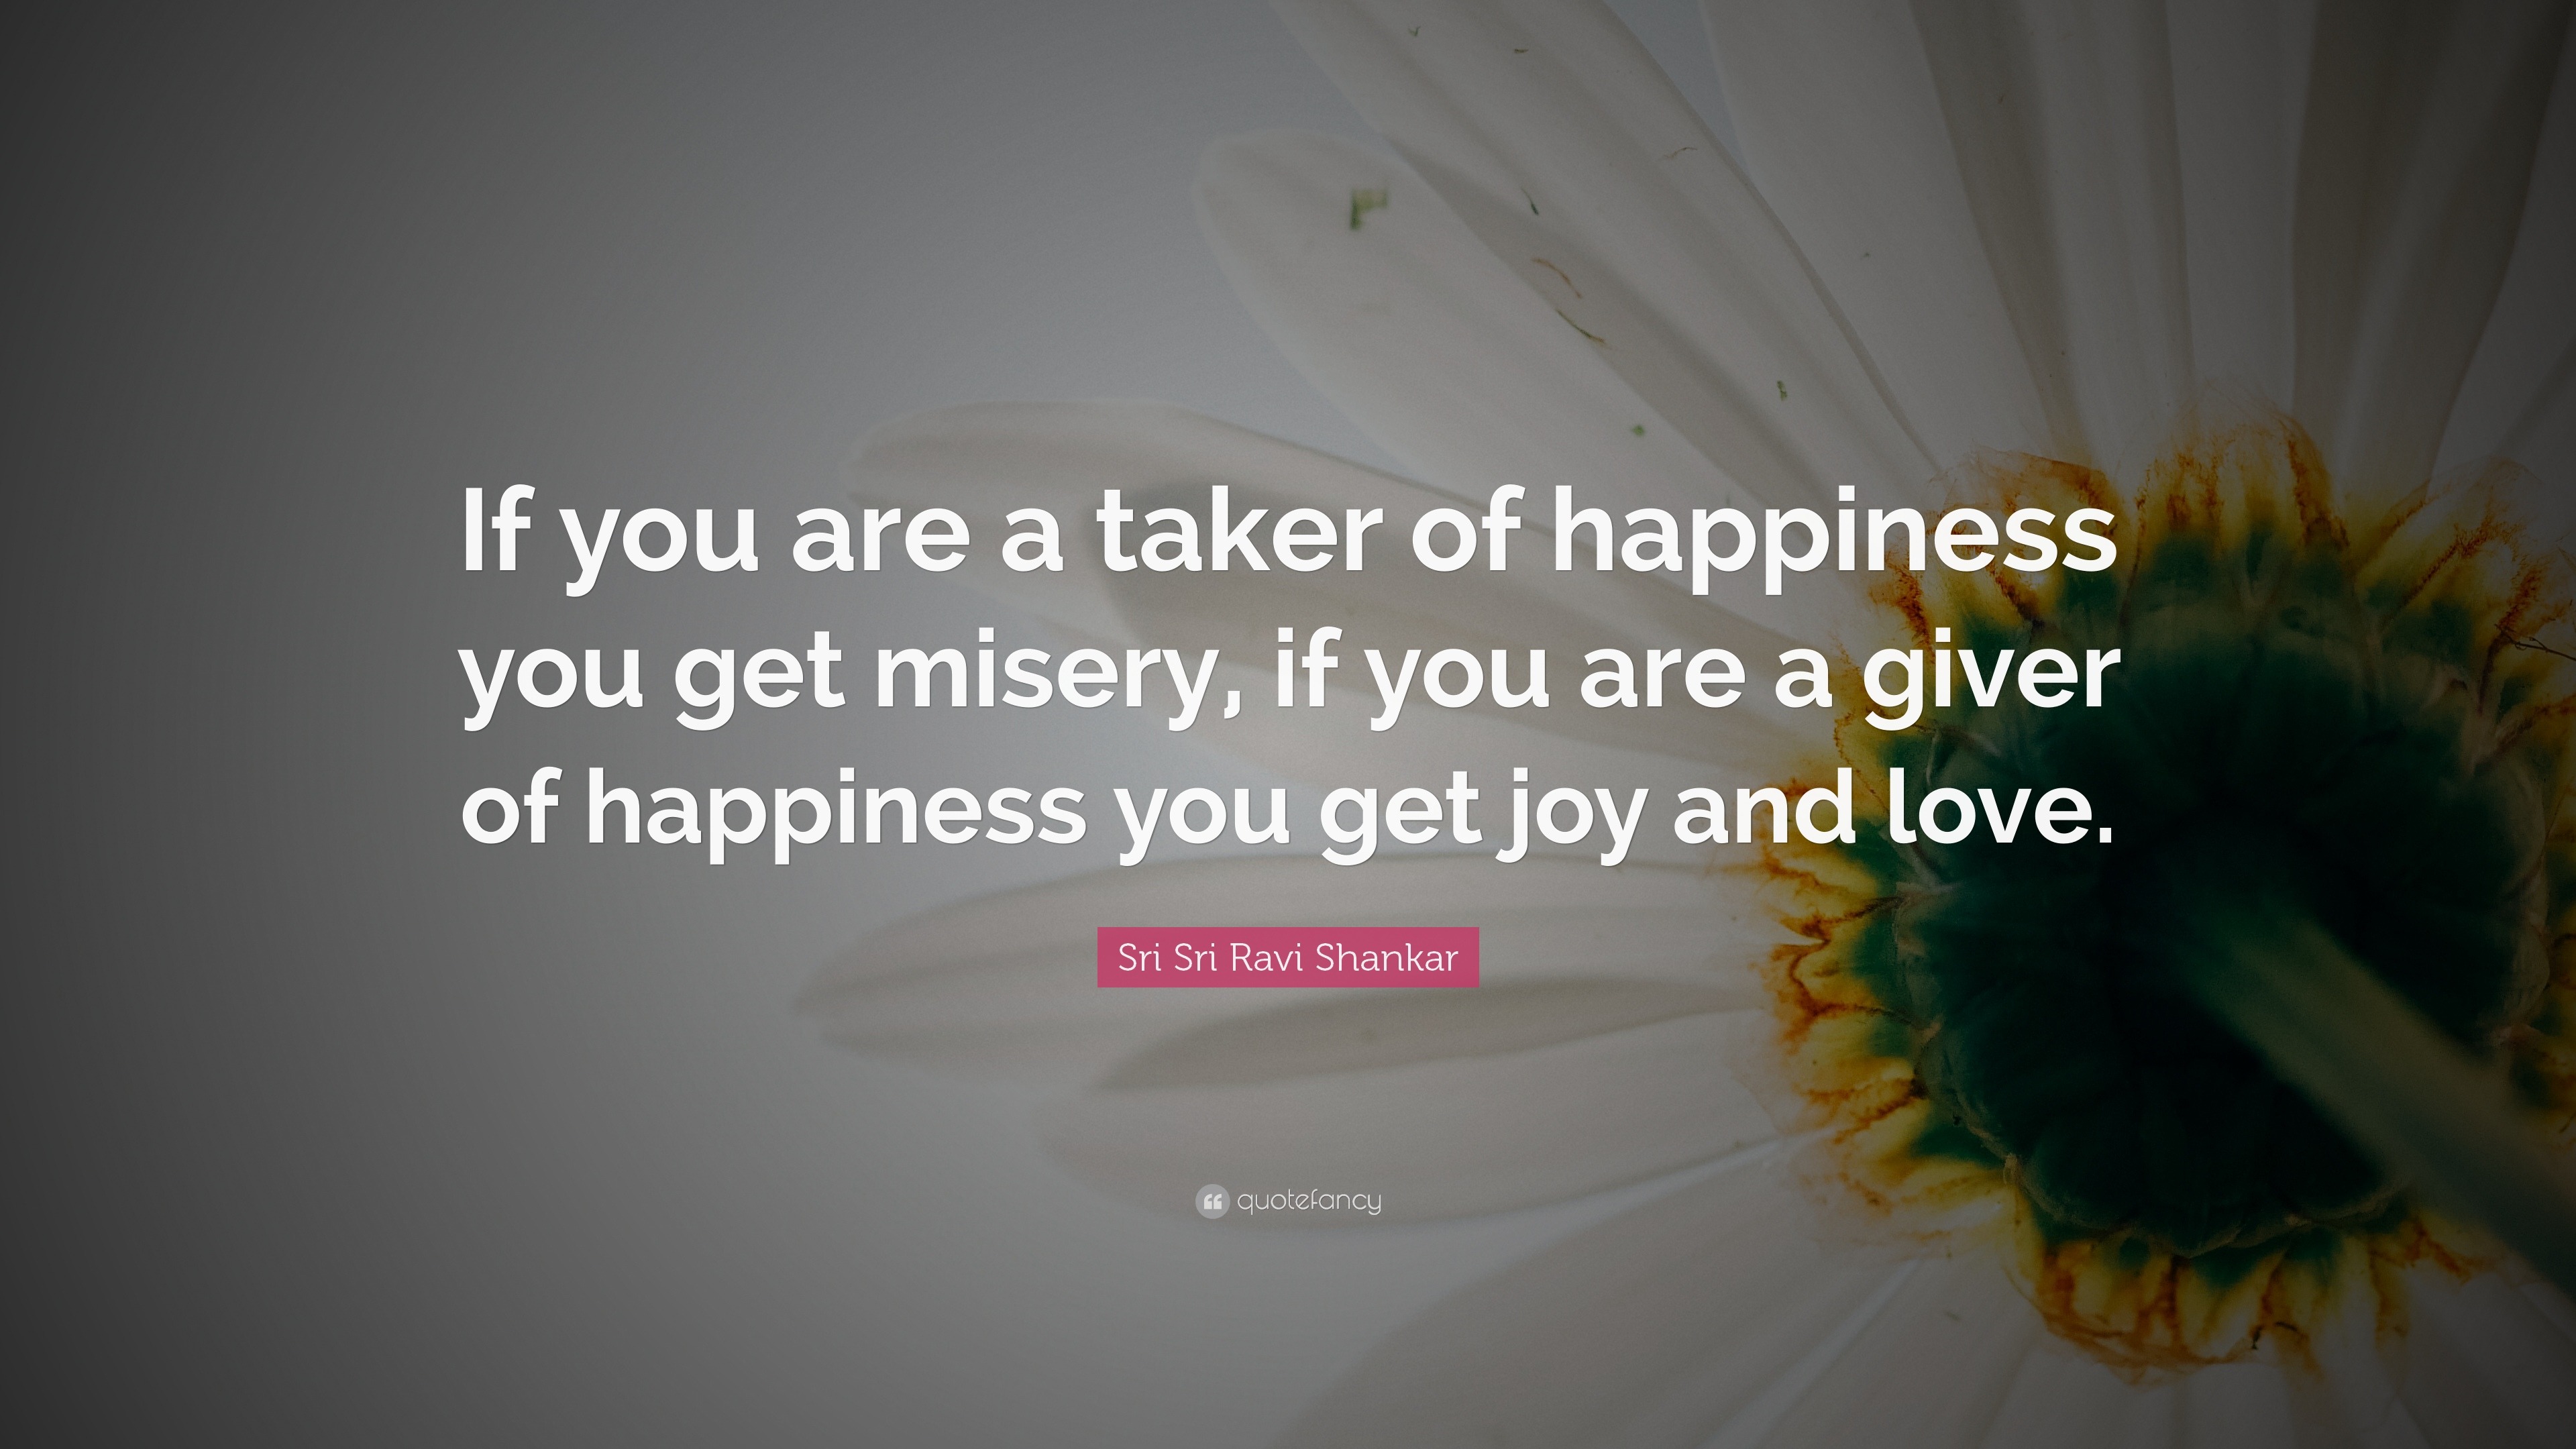 Sri Sri Ravi Shankar Quote “If you are a taker of happiness you